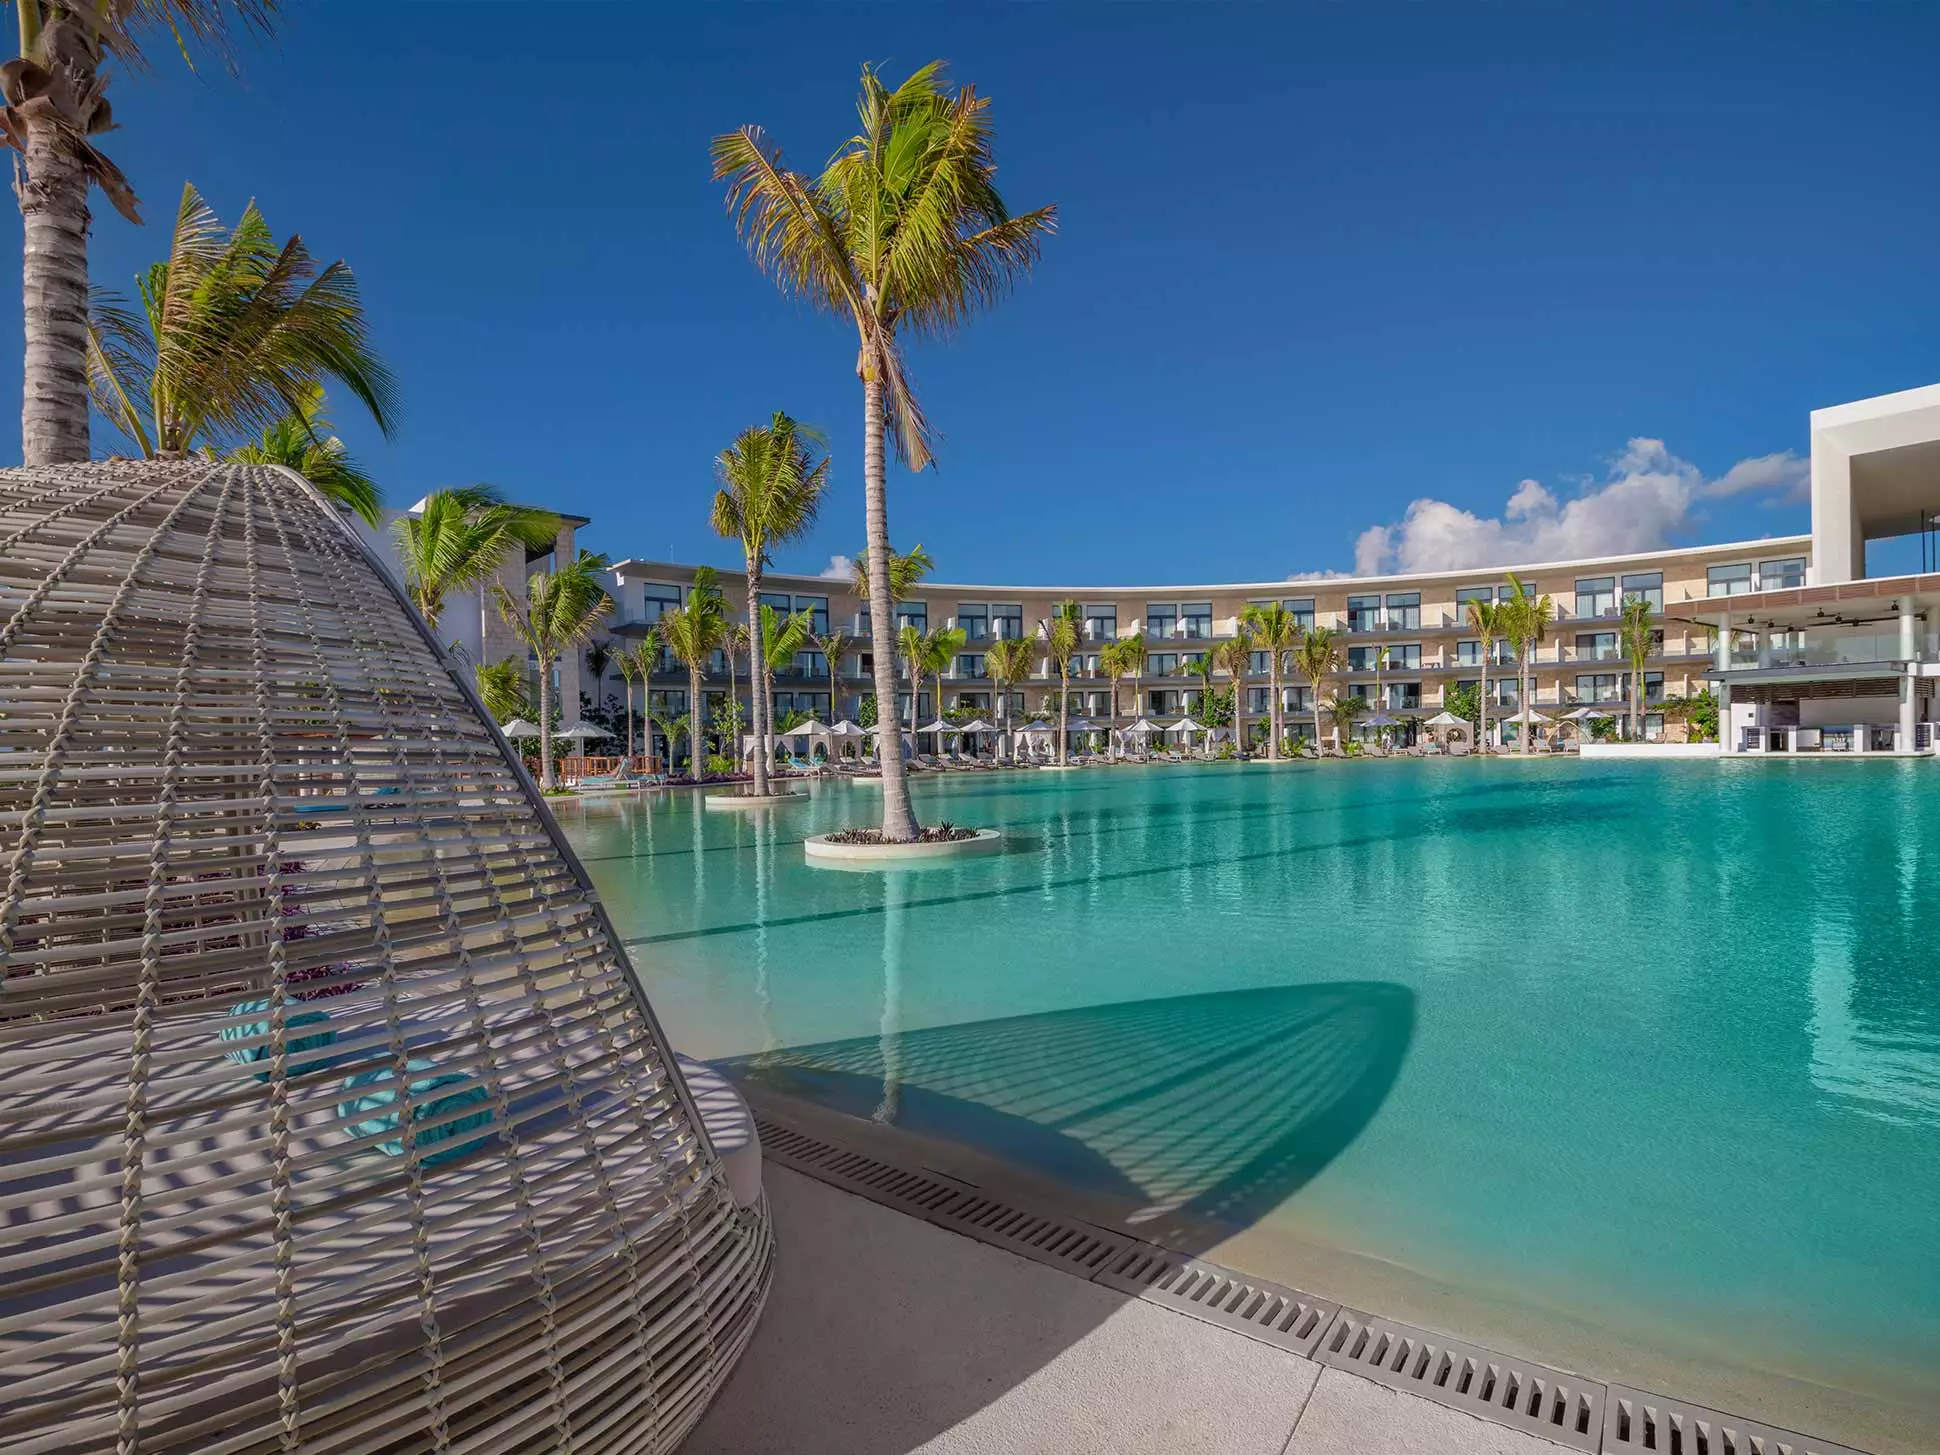 The weekend retreat will takes place in the stunning palm-shaded crowds of the Haven Riviera Cancun (